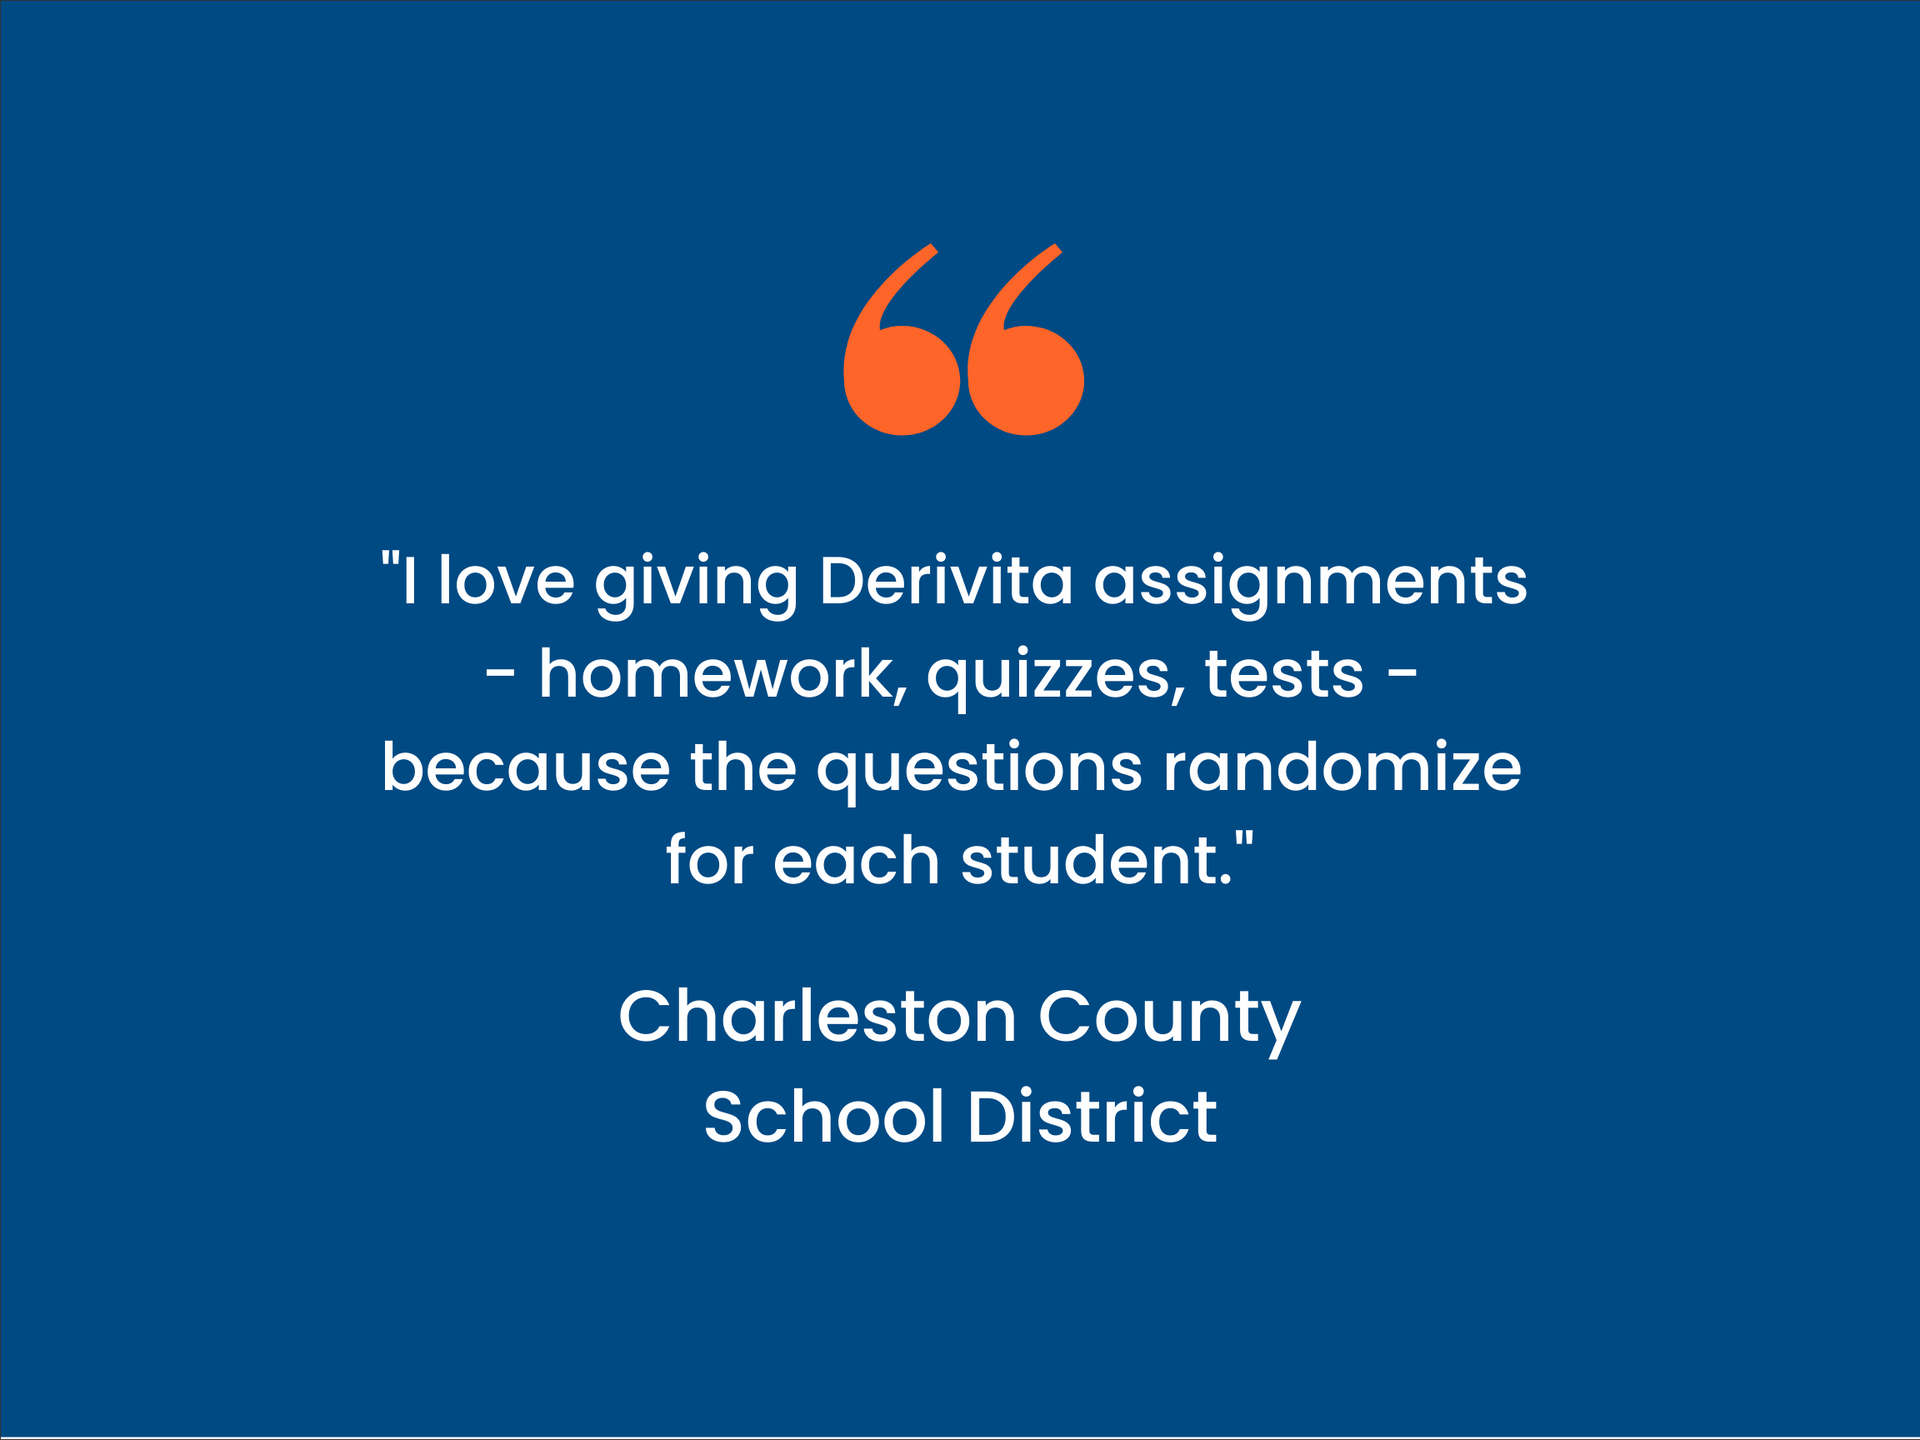 Quote card - Charleston County School District says "I love giving Derivita assignments - homework, quizzes, tests - because the questions randomize for each student."